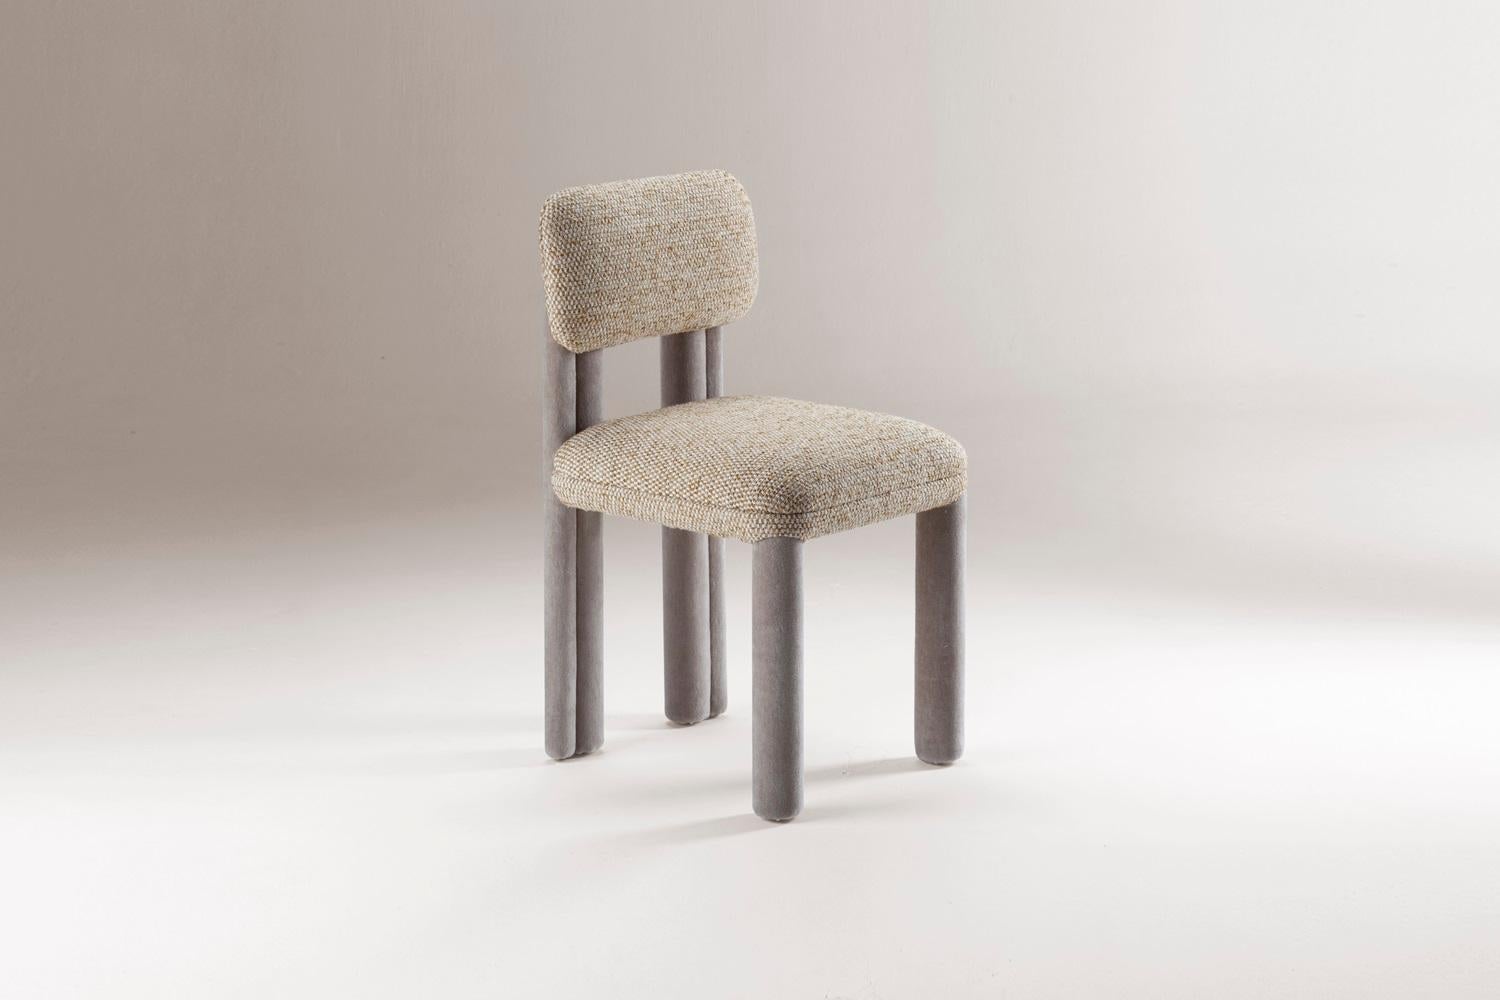 DOOQ New Modern Dining Chair Camelia in Beige and Gray Fabric Fully Upholstered

Introducing Camelia, a chair that gracefully embodies the essence of the Romantic period, channeling its ideals of passion and elegance. With its sensuous curves and